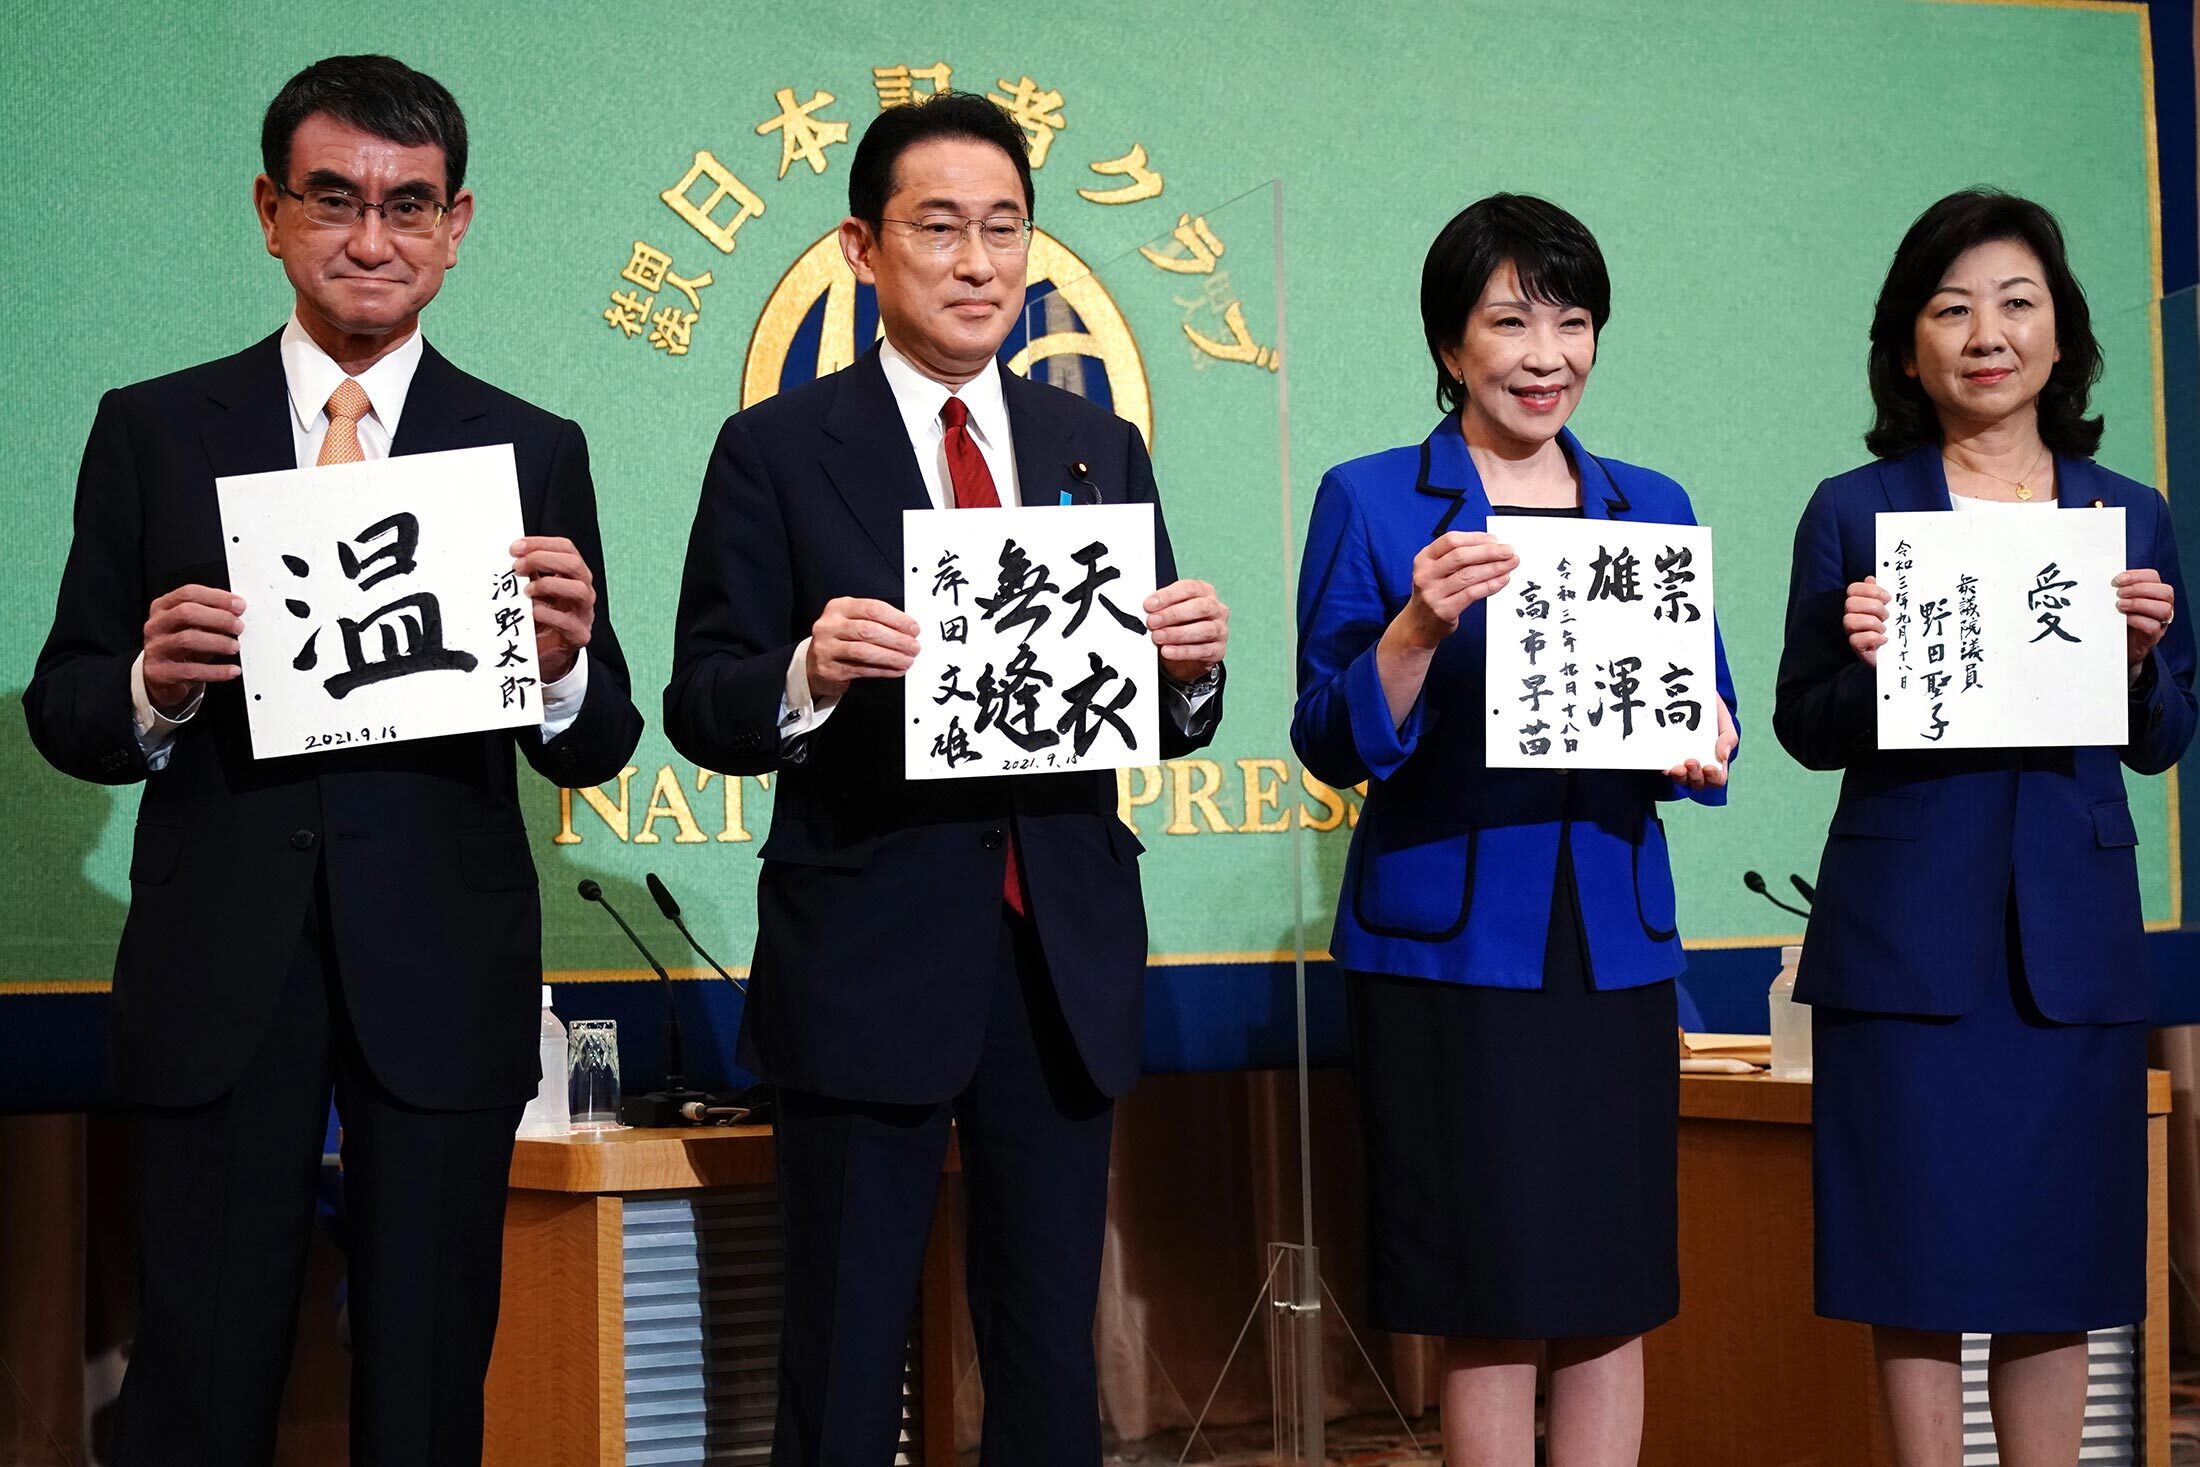 Candidates for the selection of Japan’s next prime minister gather before a debate at the National Press Club in Tokyo on Sept. 18.